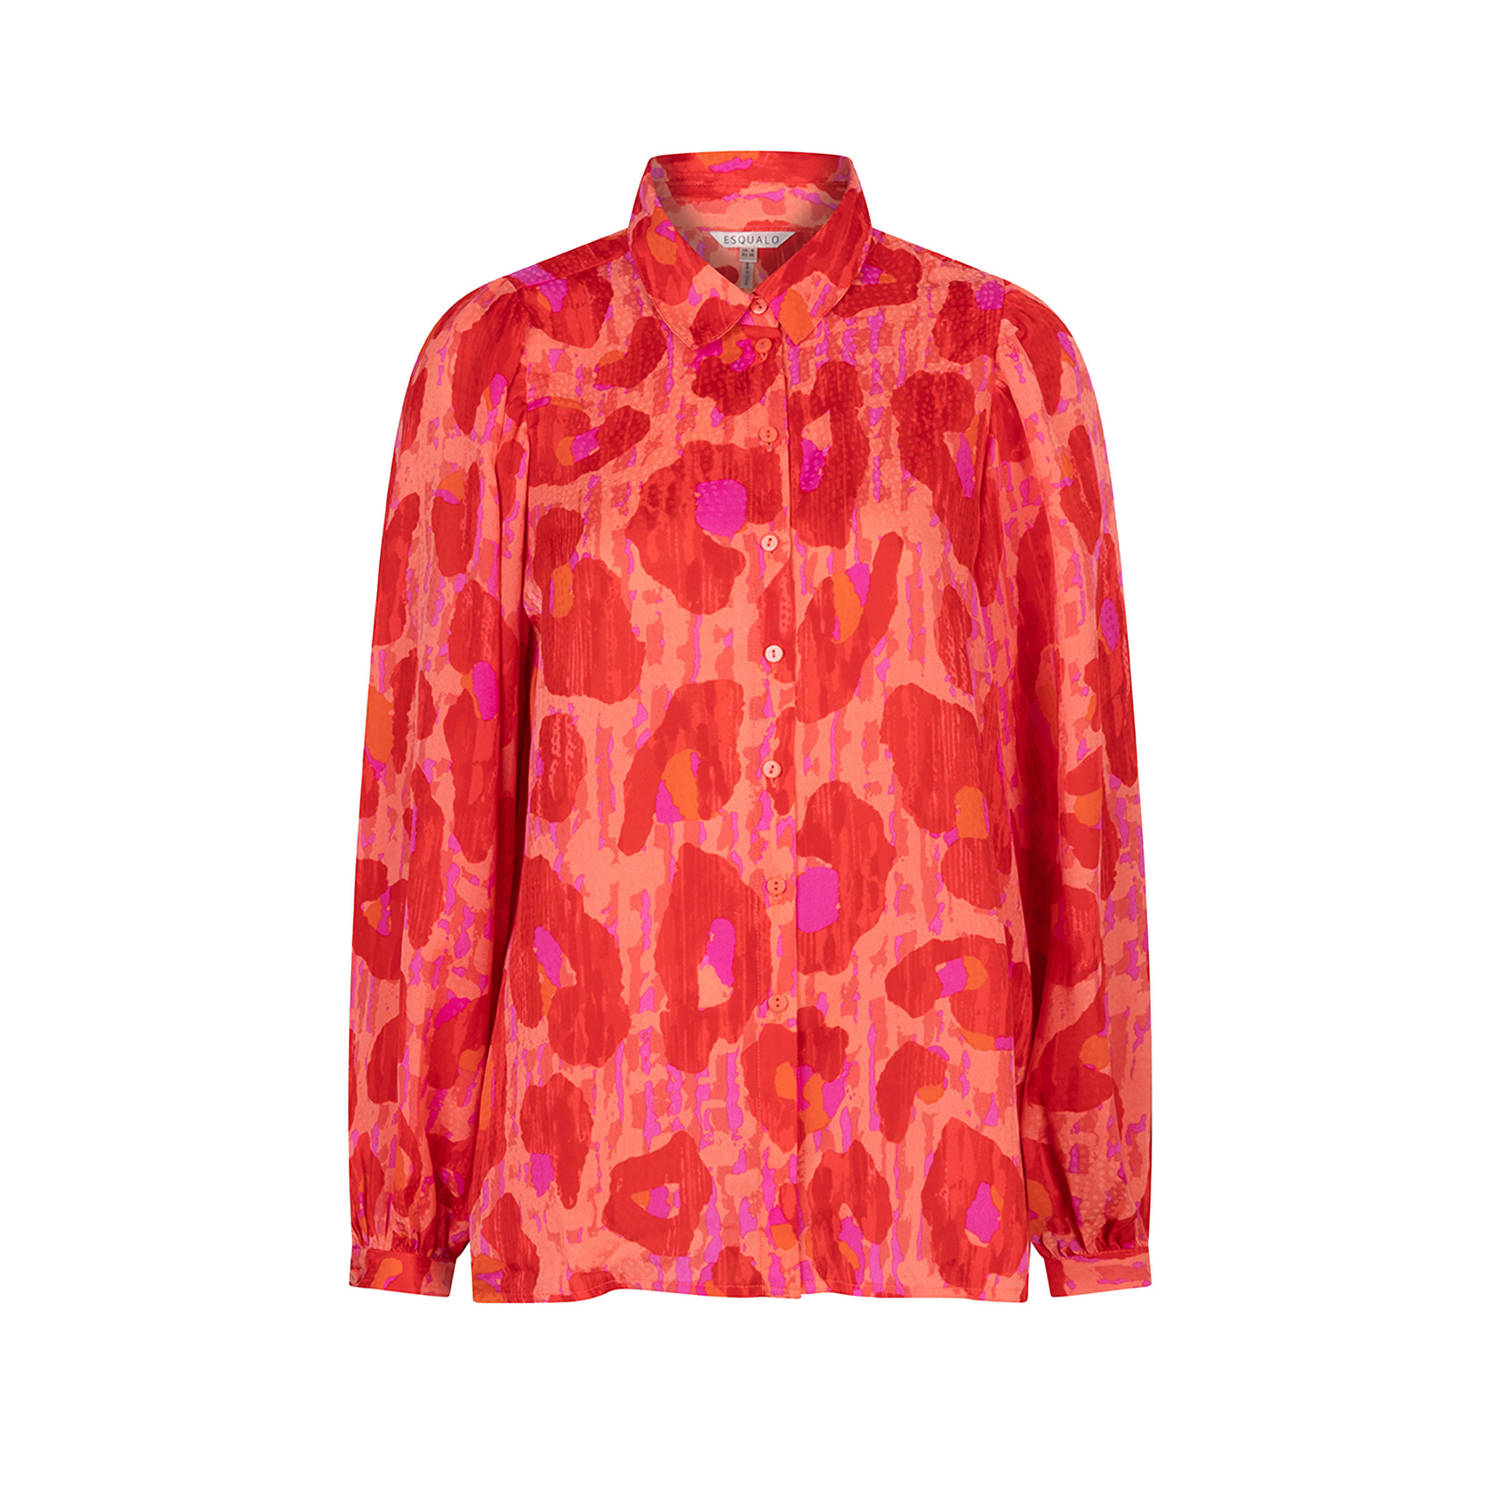 Esqualo blouse met all over print roze rood